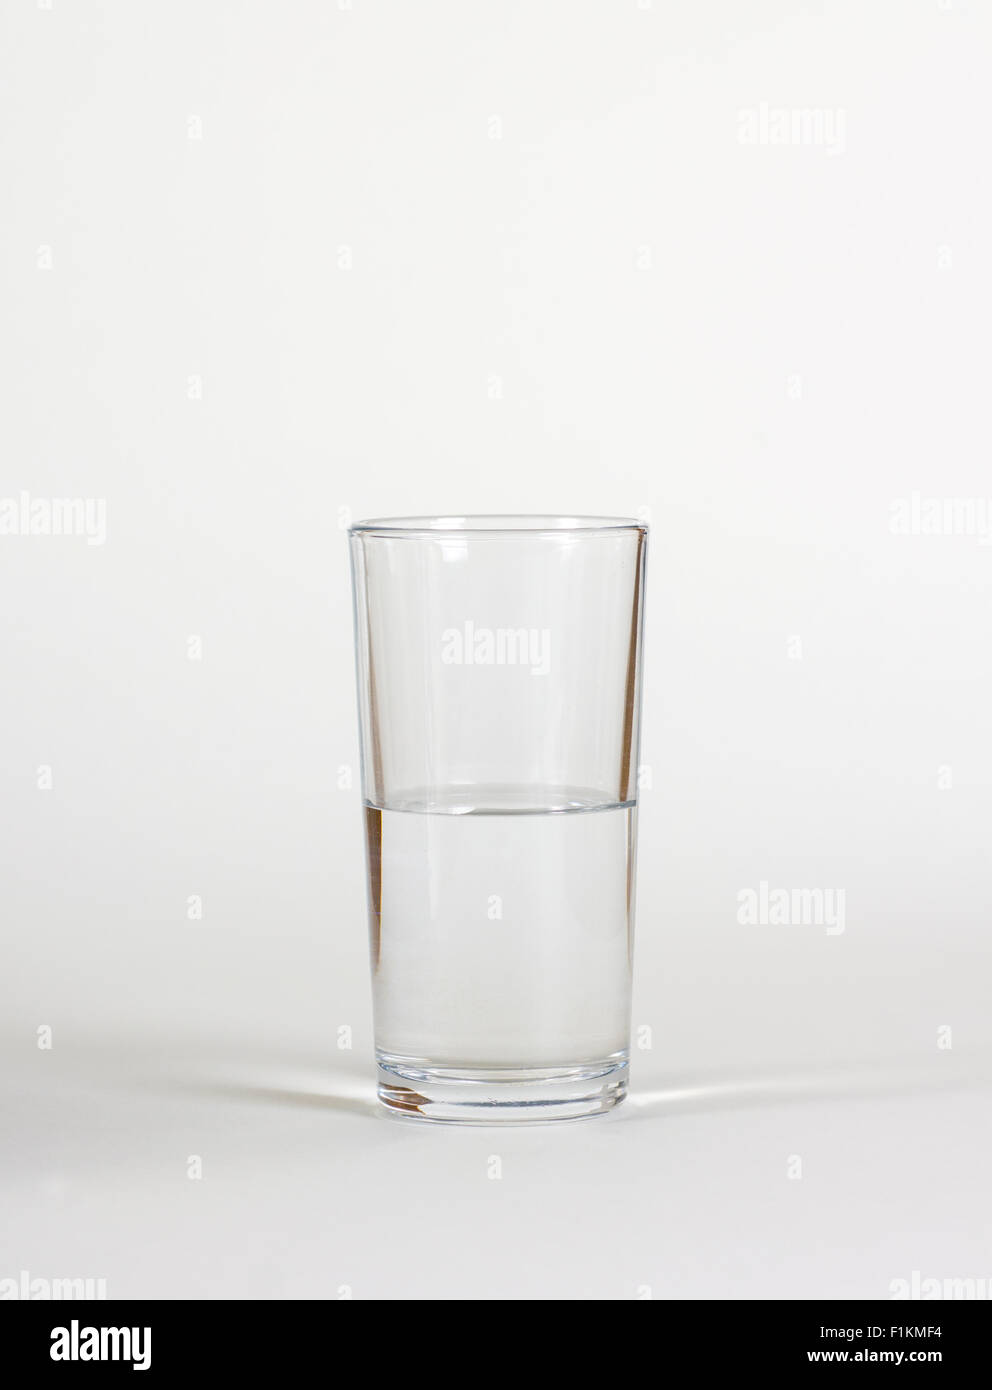 A glass of water, half empty or half full Stock Photo